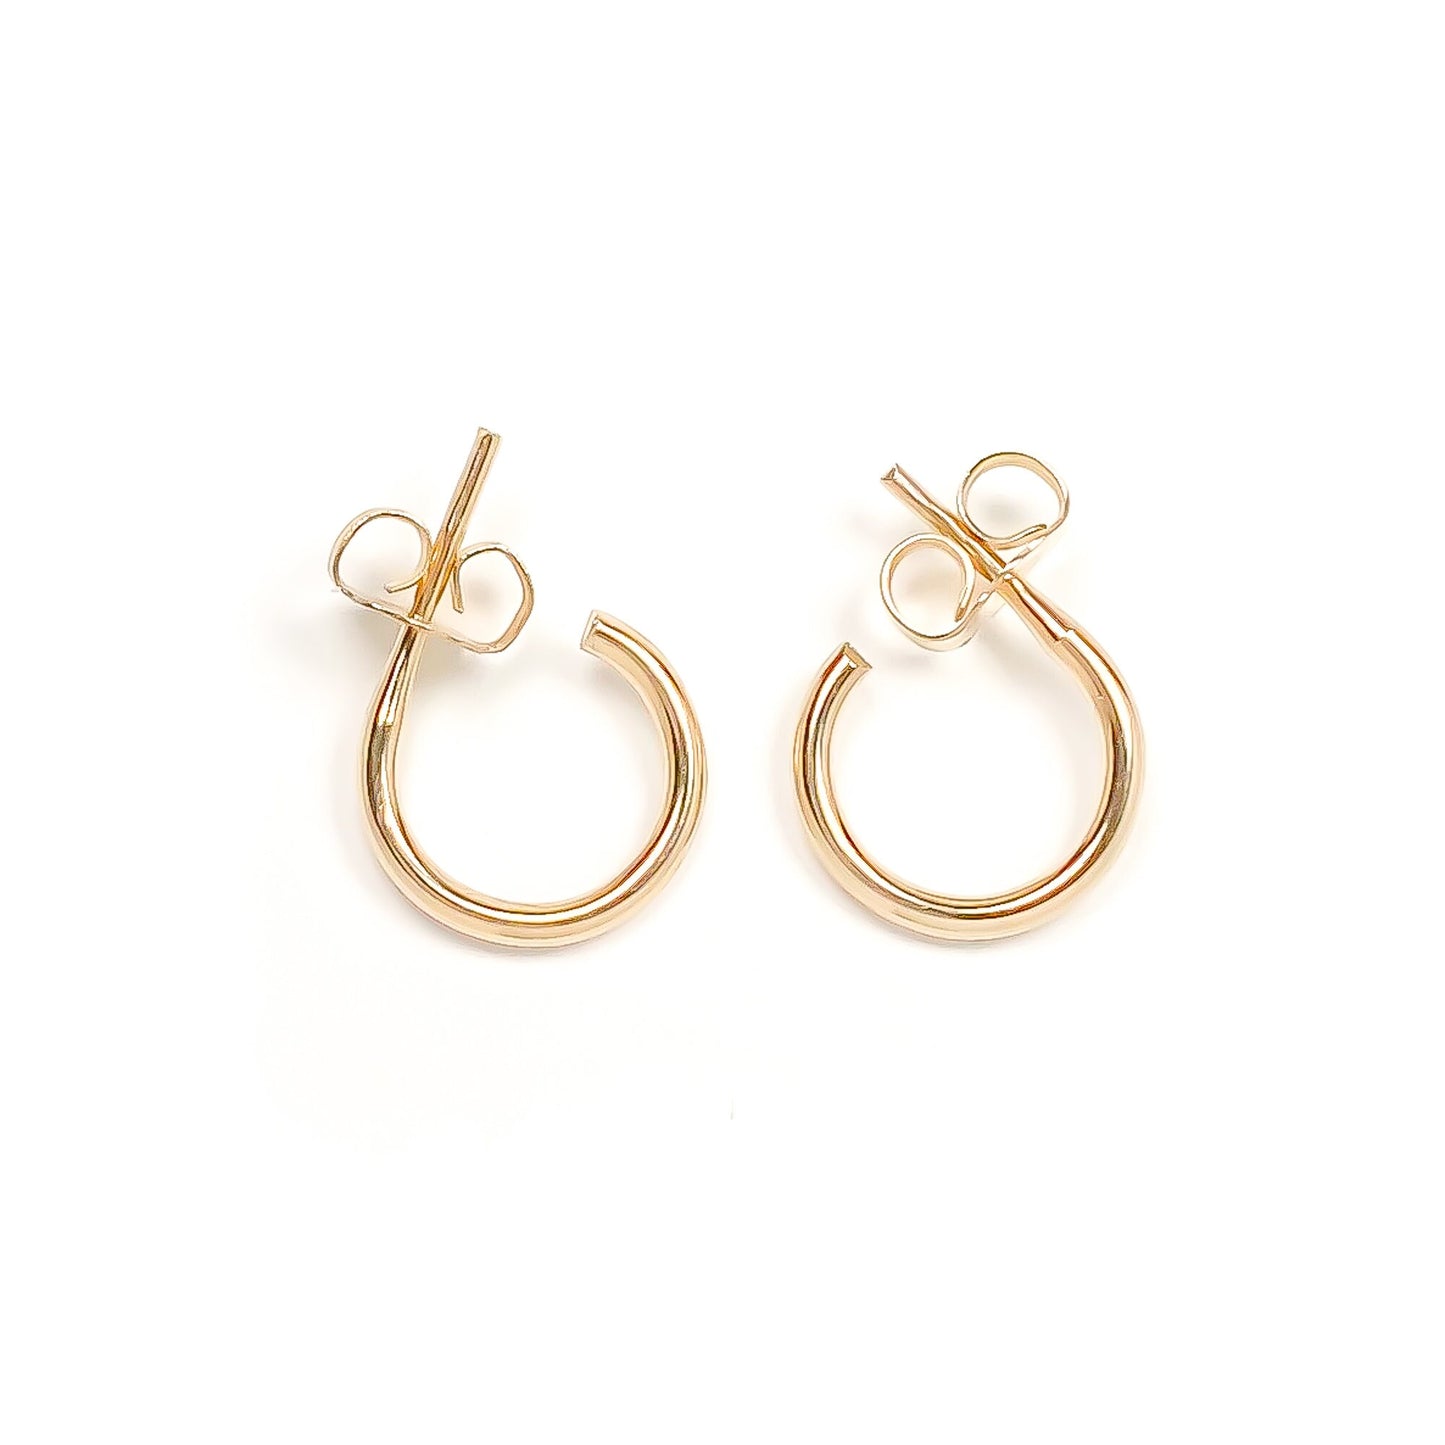 9mm Hoop Earrings with Post, 14K Gold Filled